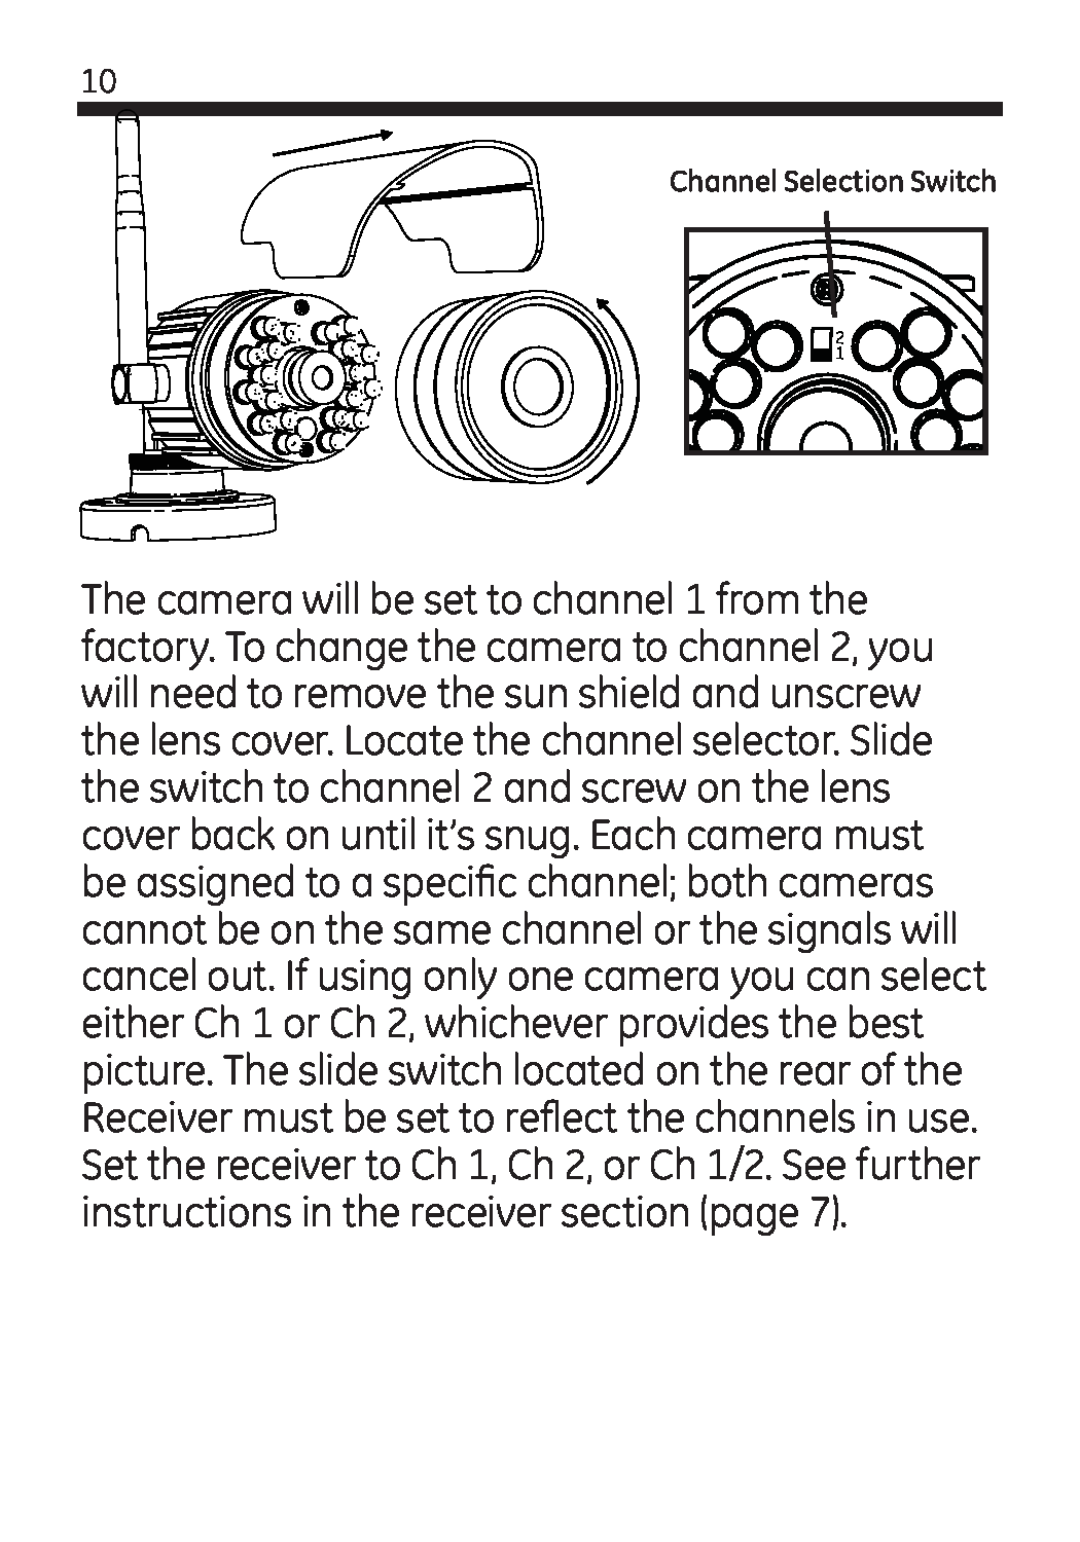 Jasco 45246 user manual Channel Selection Switch 